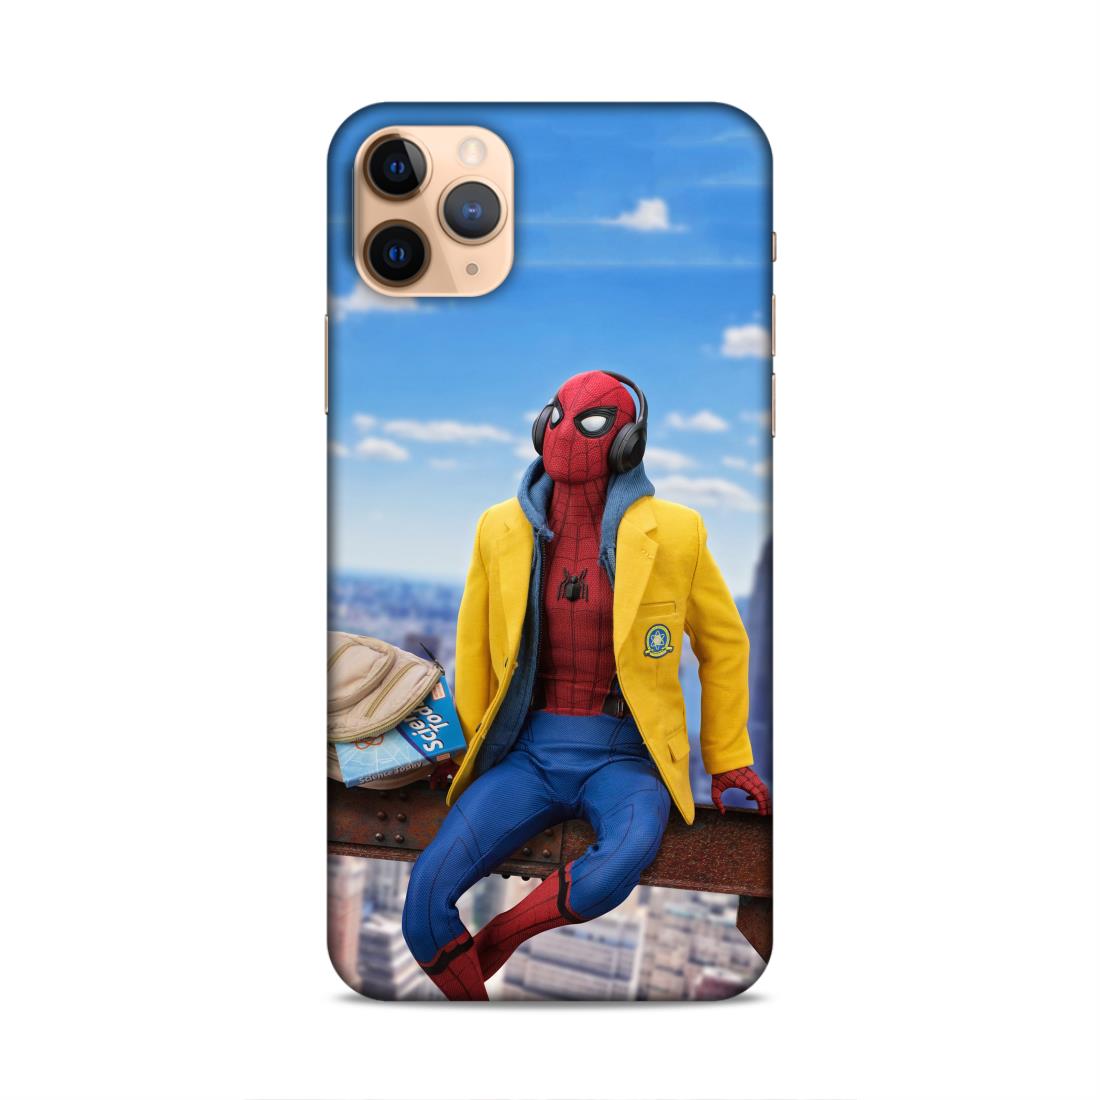 Cool Spiderman Hard Back Case For Apple iPhone 11 Pro